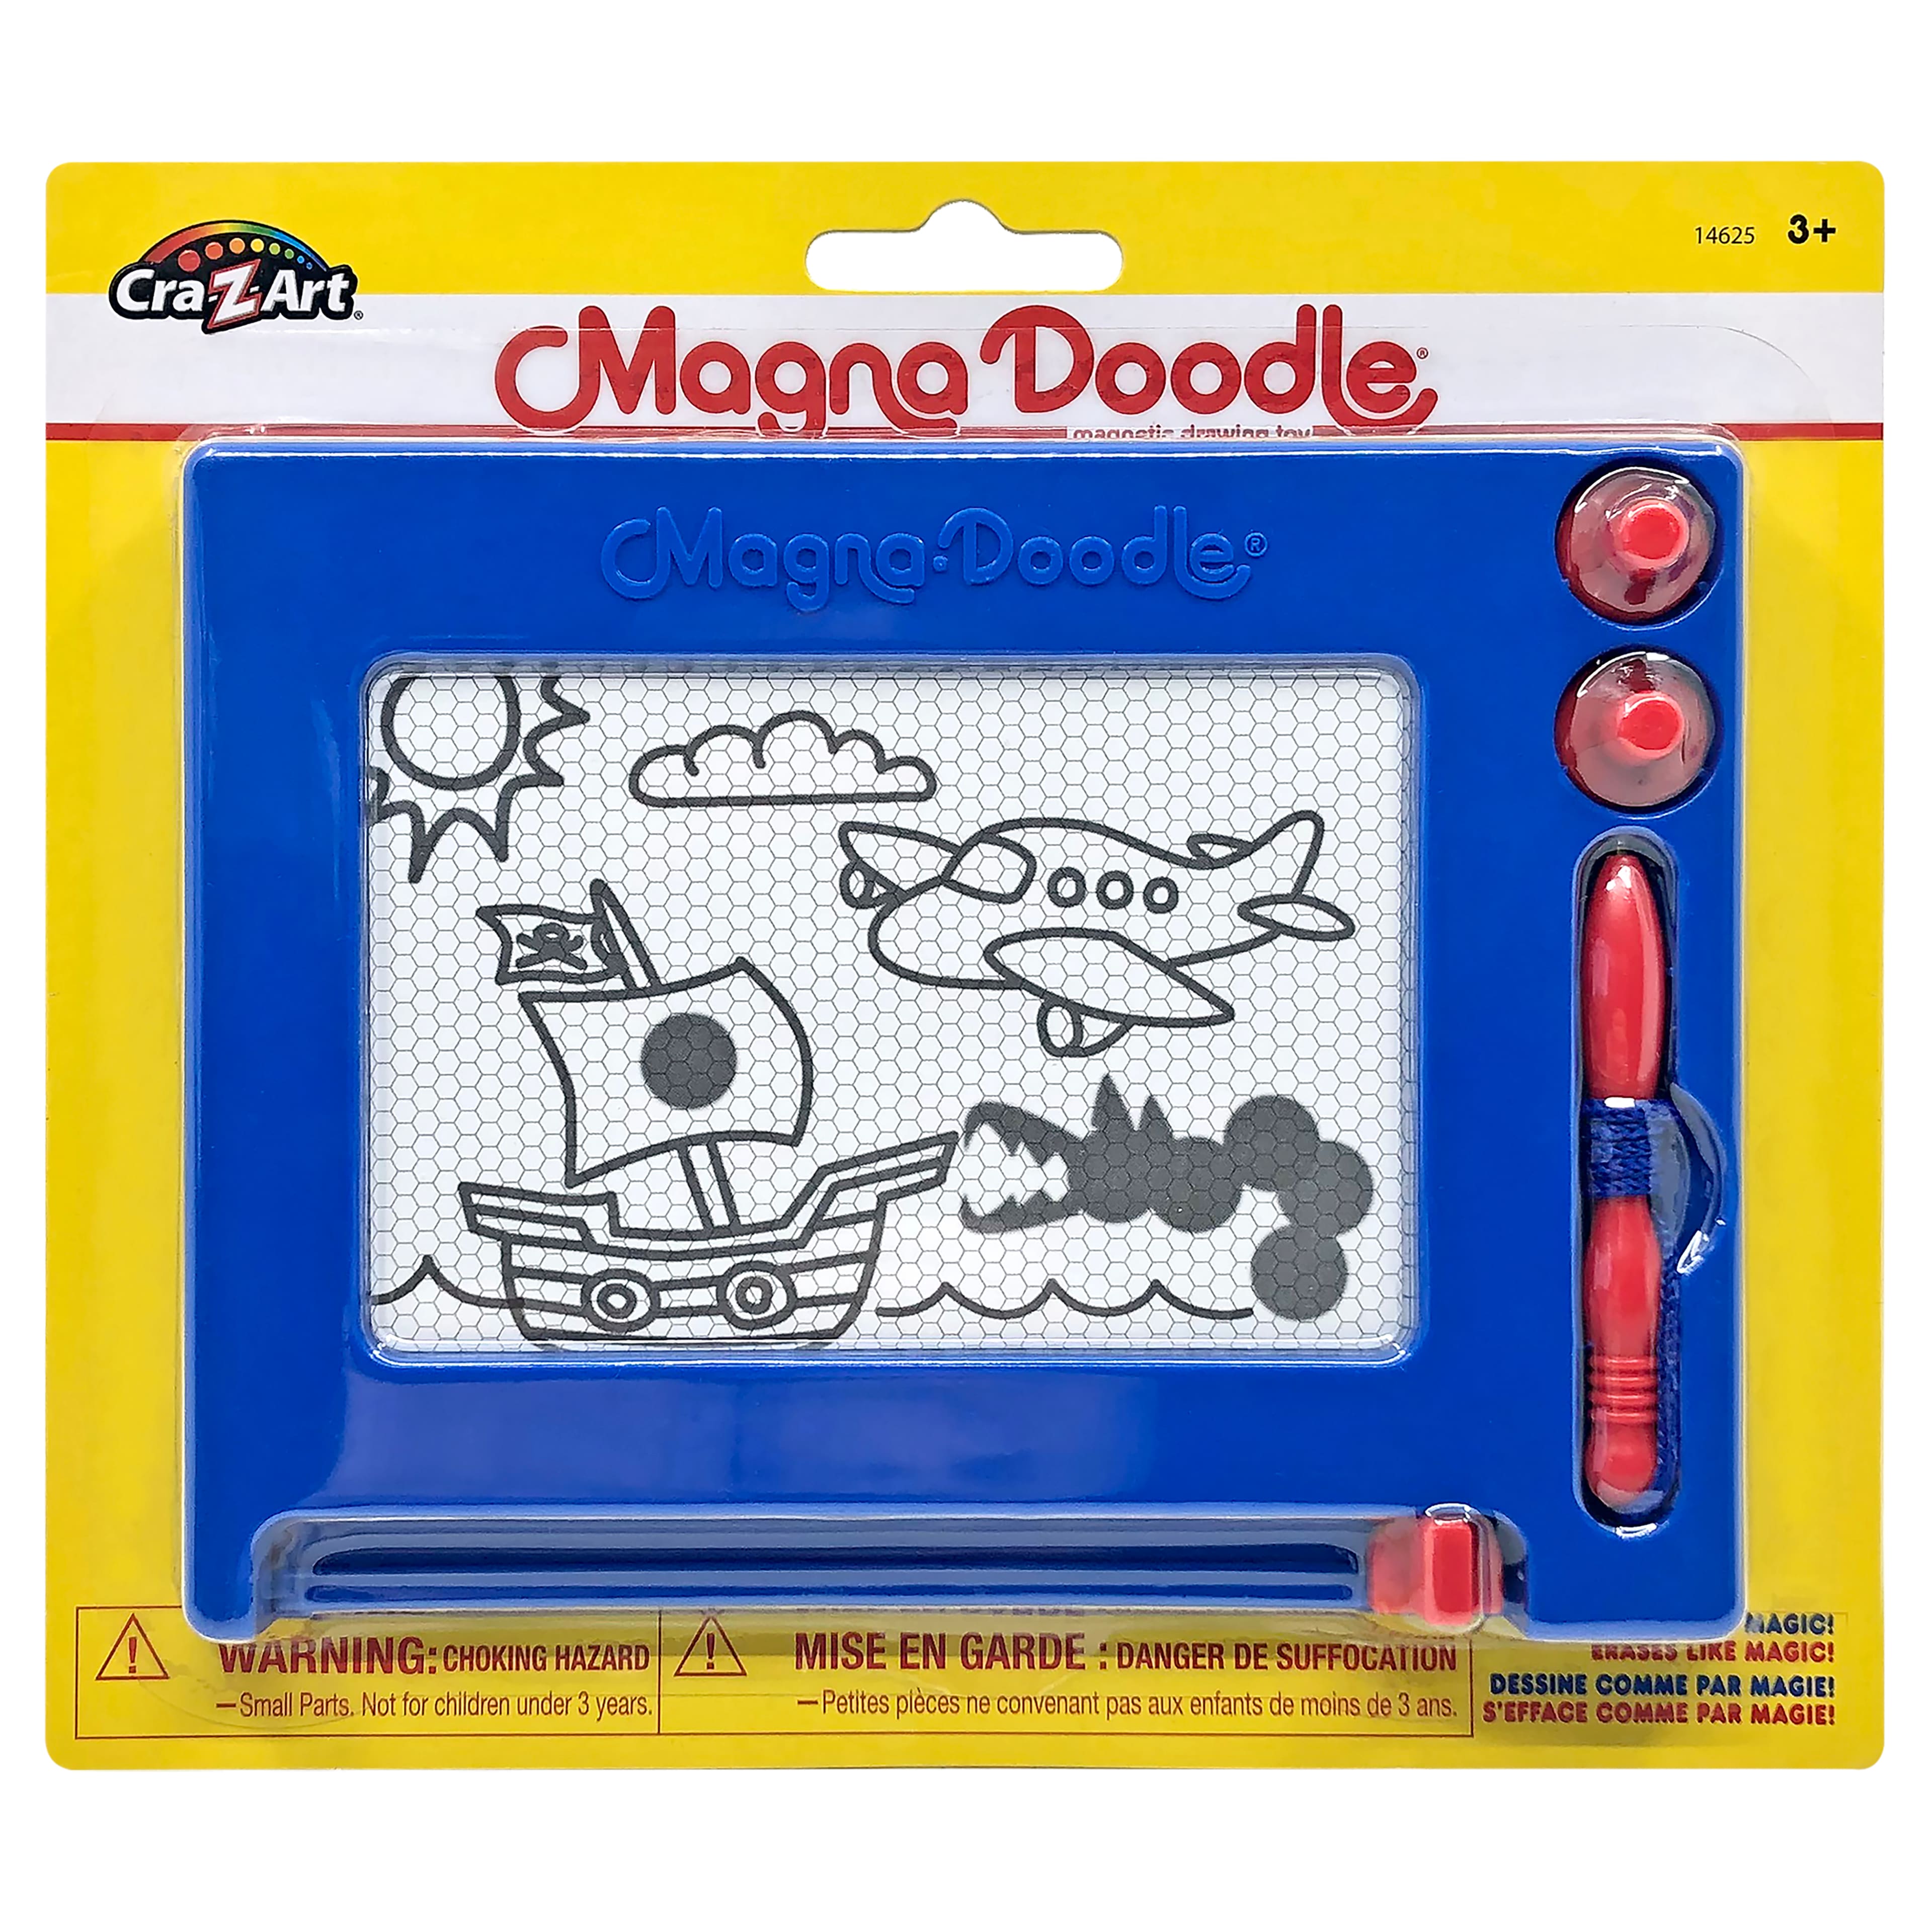 Buy Cra-Z-Art The Original Magna Doodle Magnetic Drawing Toy